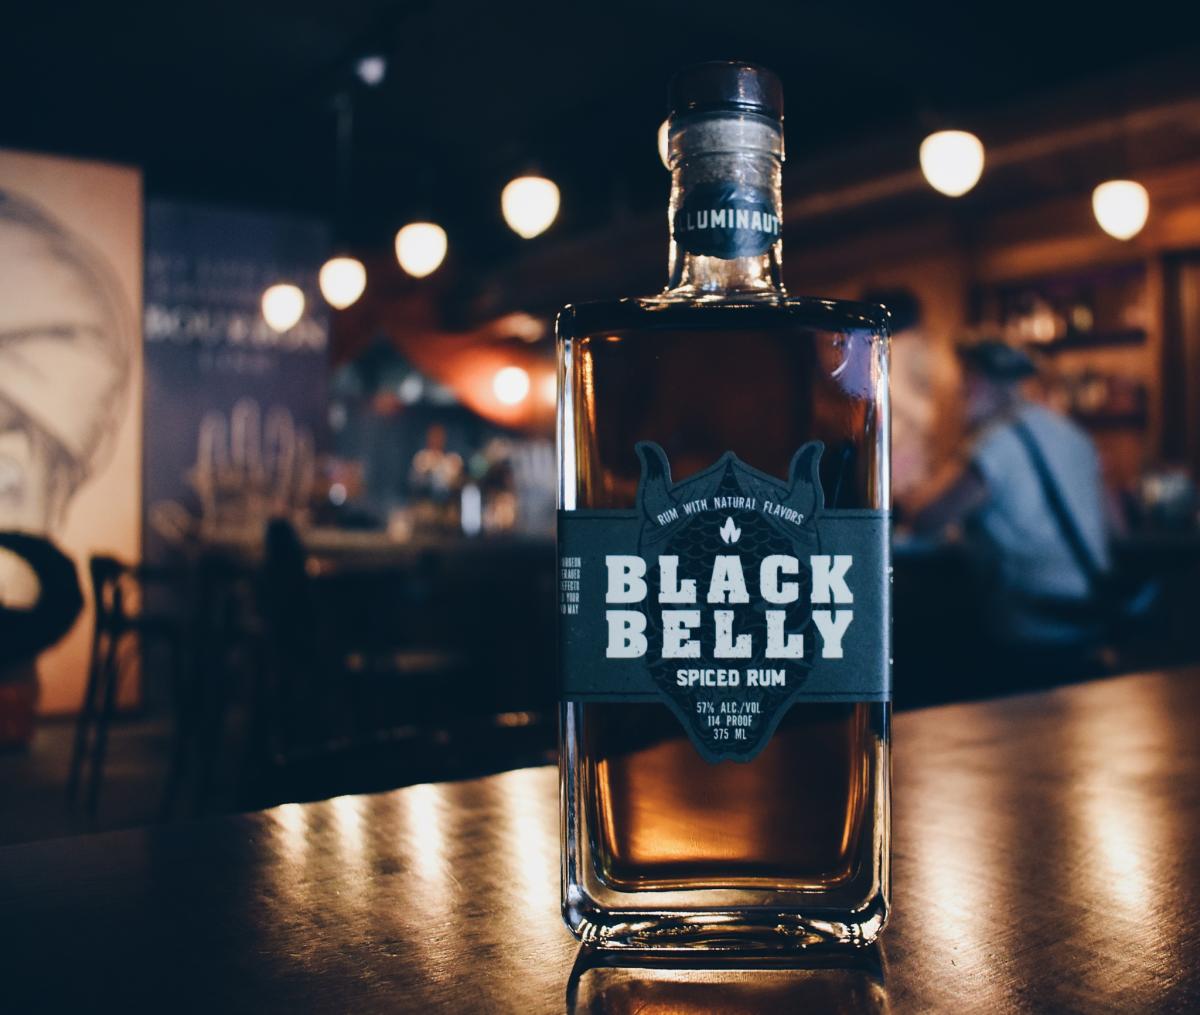 A bottle of Black Belly spiced rum sits on the bar at Second Sight Spirits.